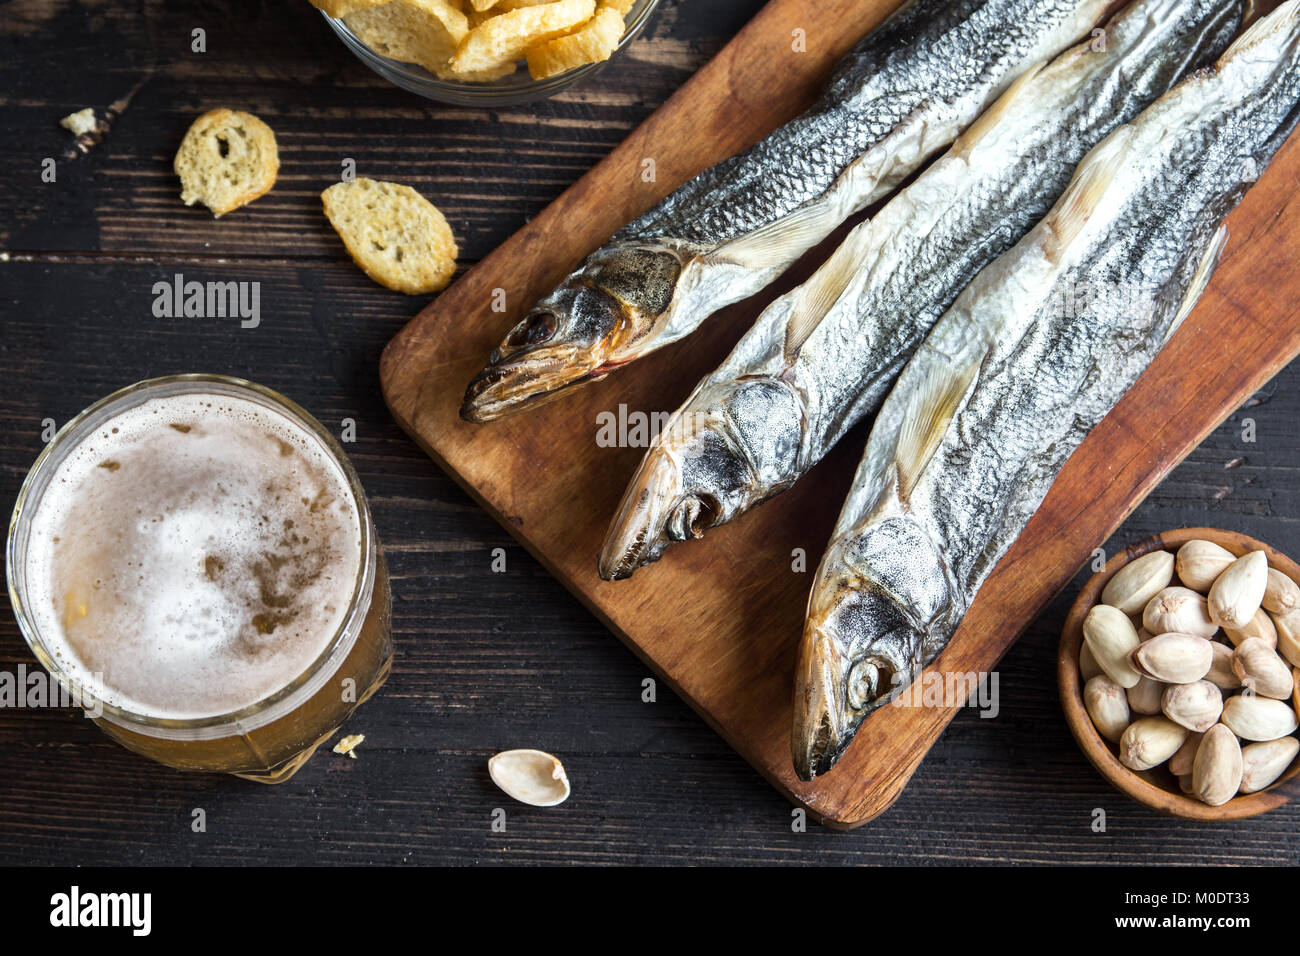 Assorted snacks for beer: sun dried fish, nuts, salted croutons or crackers and over wooden background, top view, copy space. Lager beer and snacks, d Stock Photo